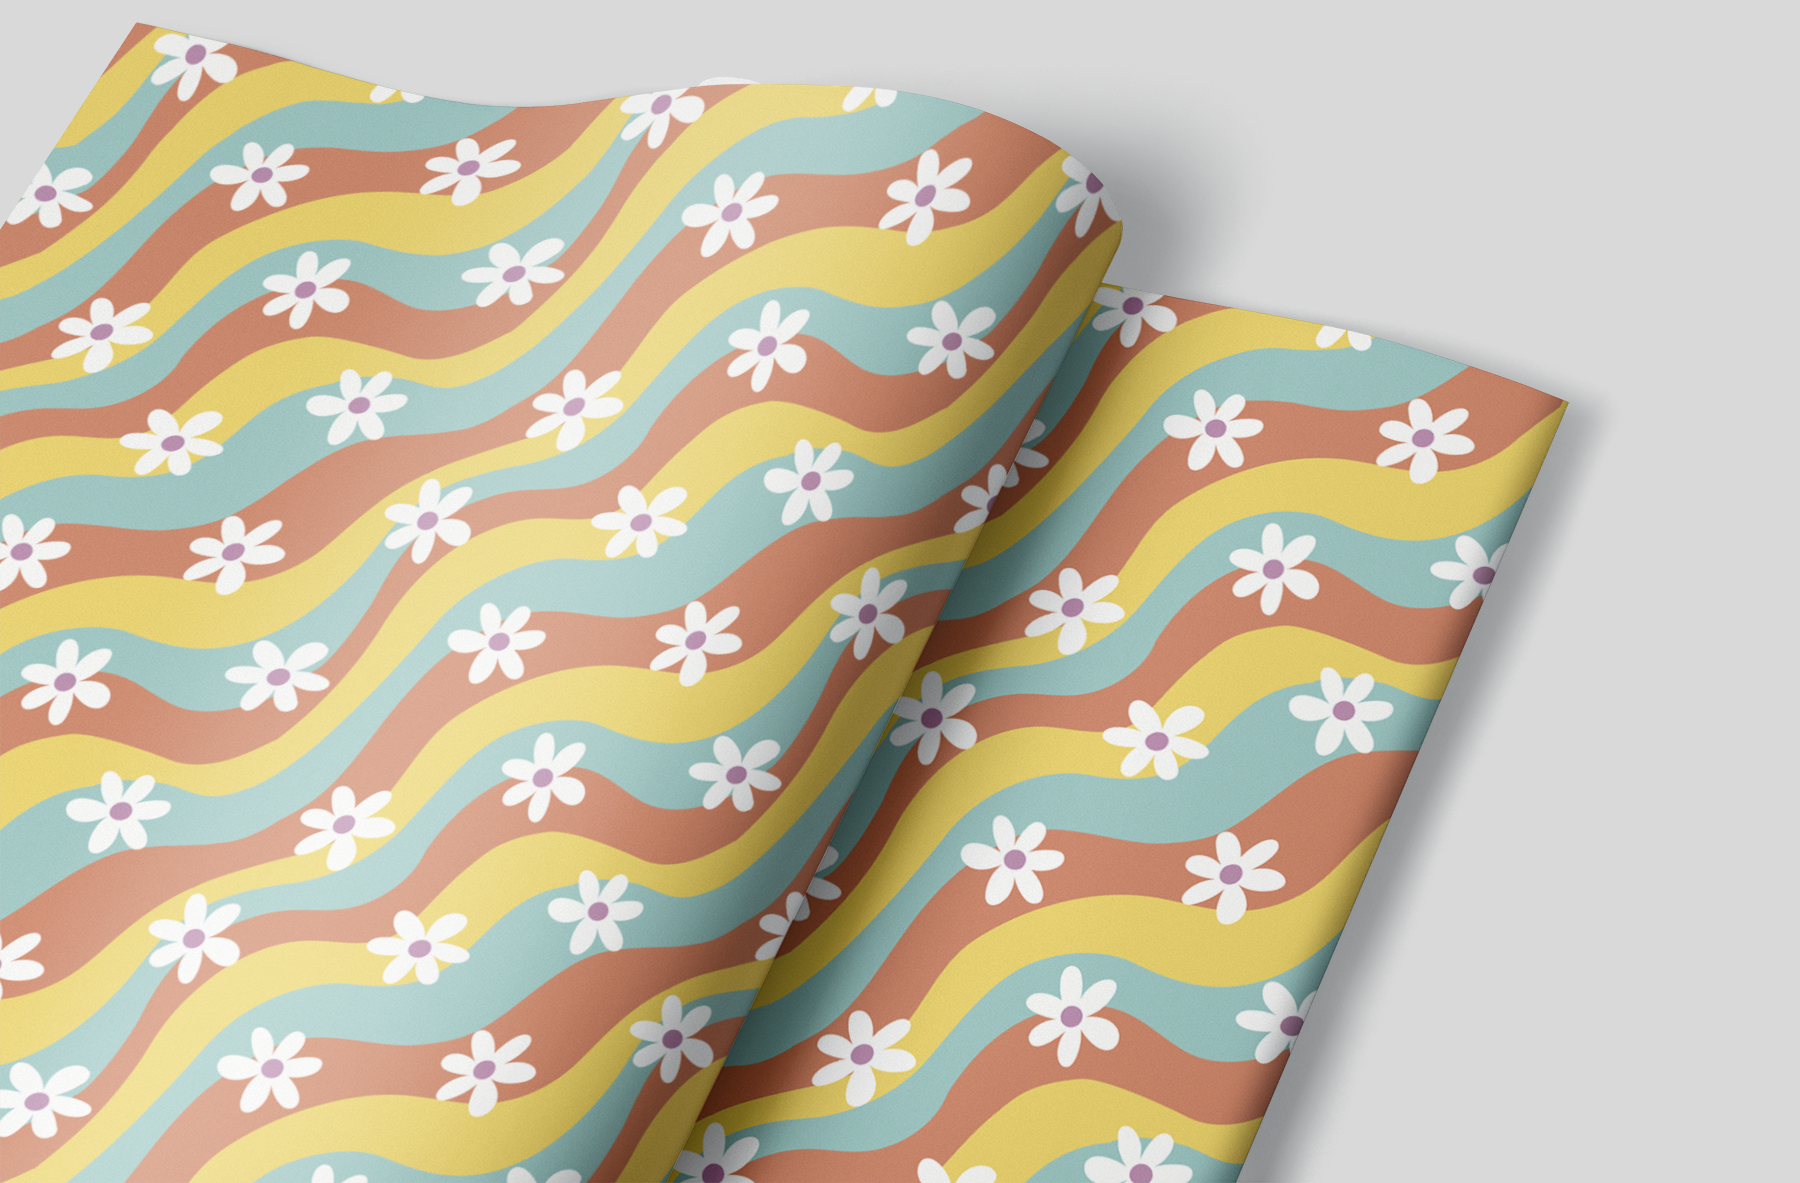 Little Daisies on Groovy Lines